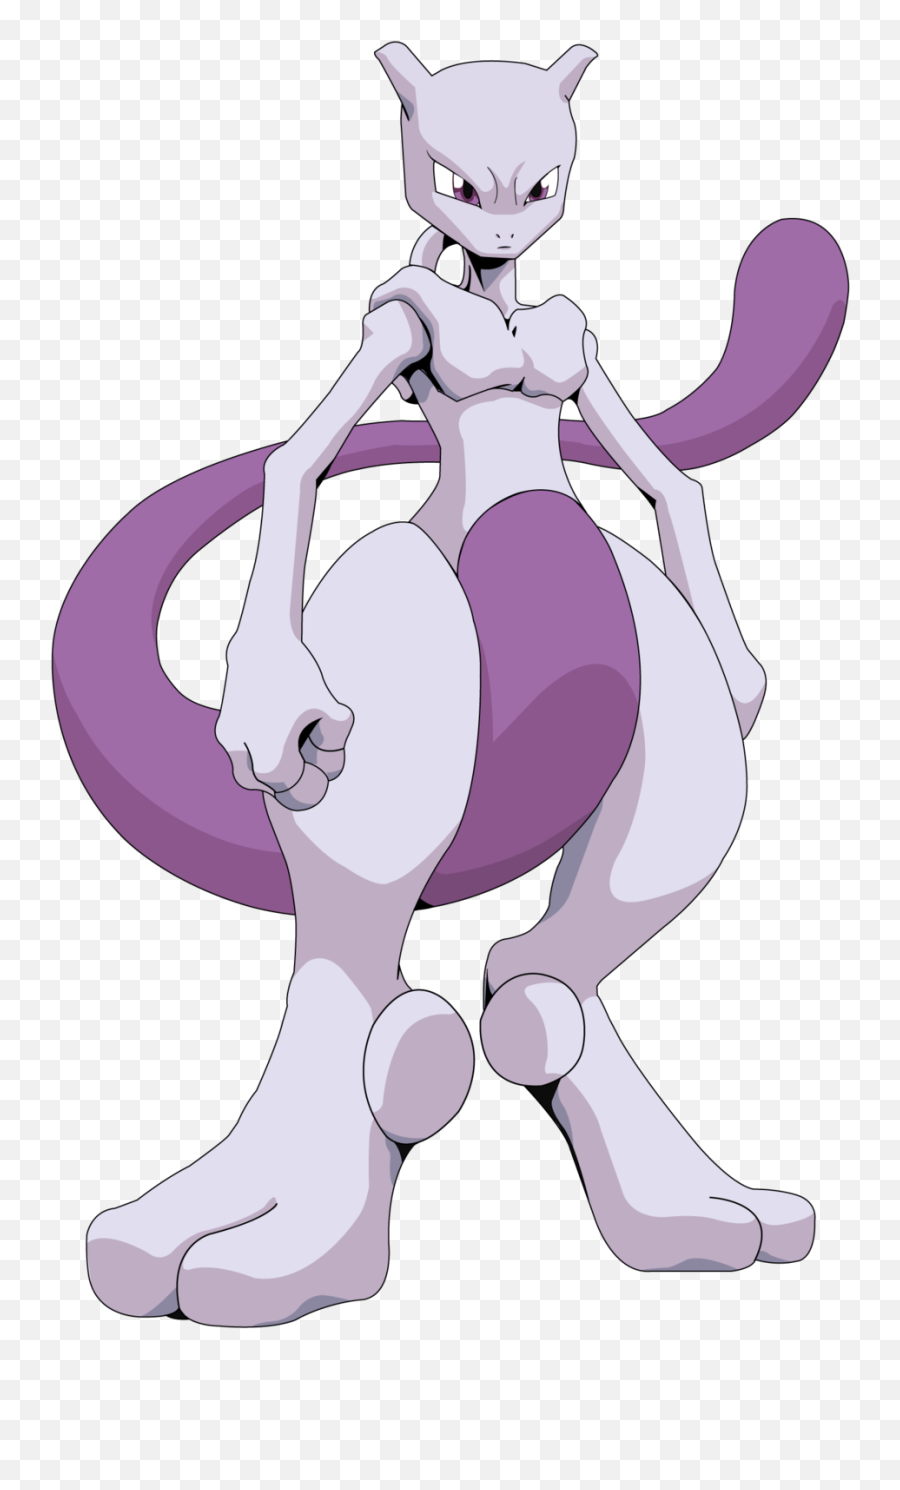 Png Transparent Mewtwo - Pokemon Mewtwo,Mewtwo Png